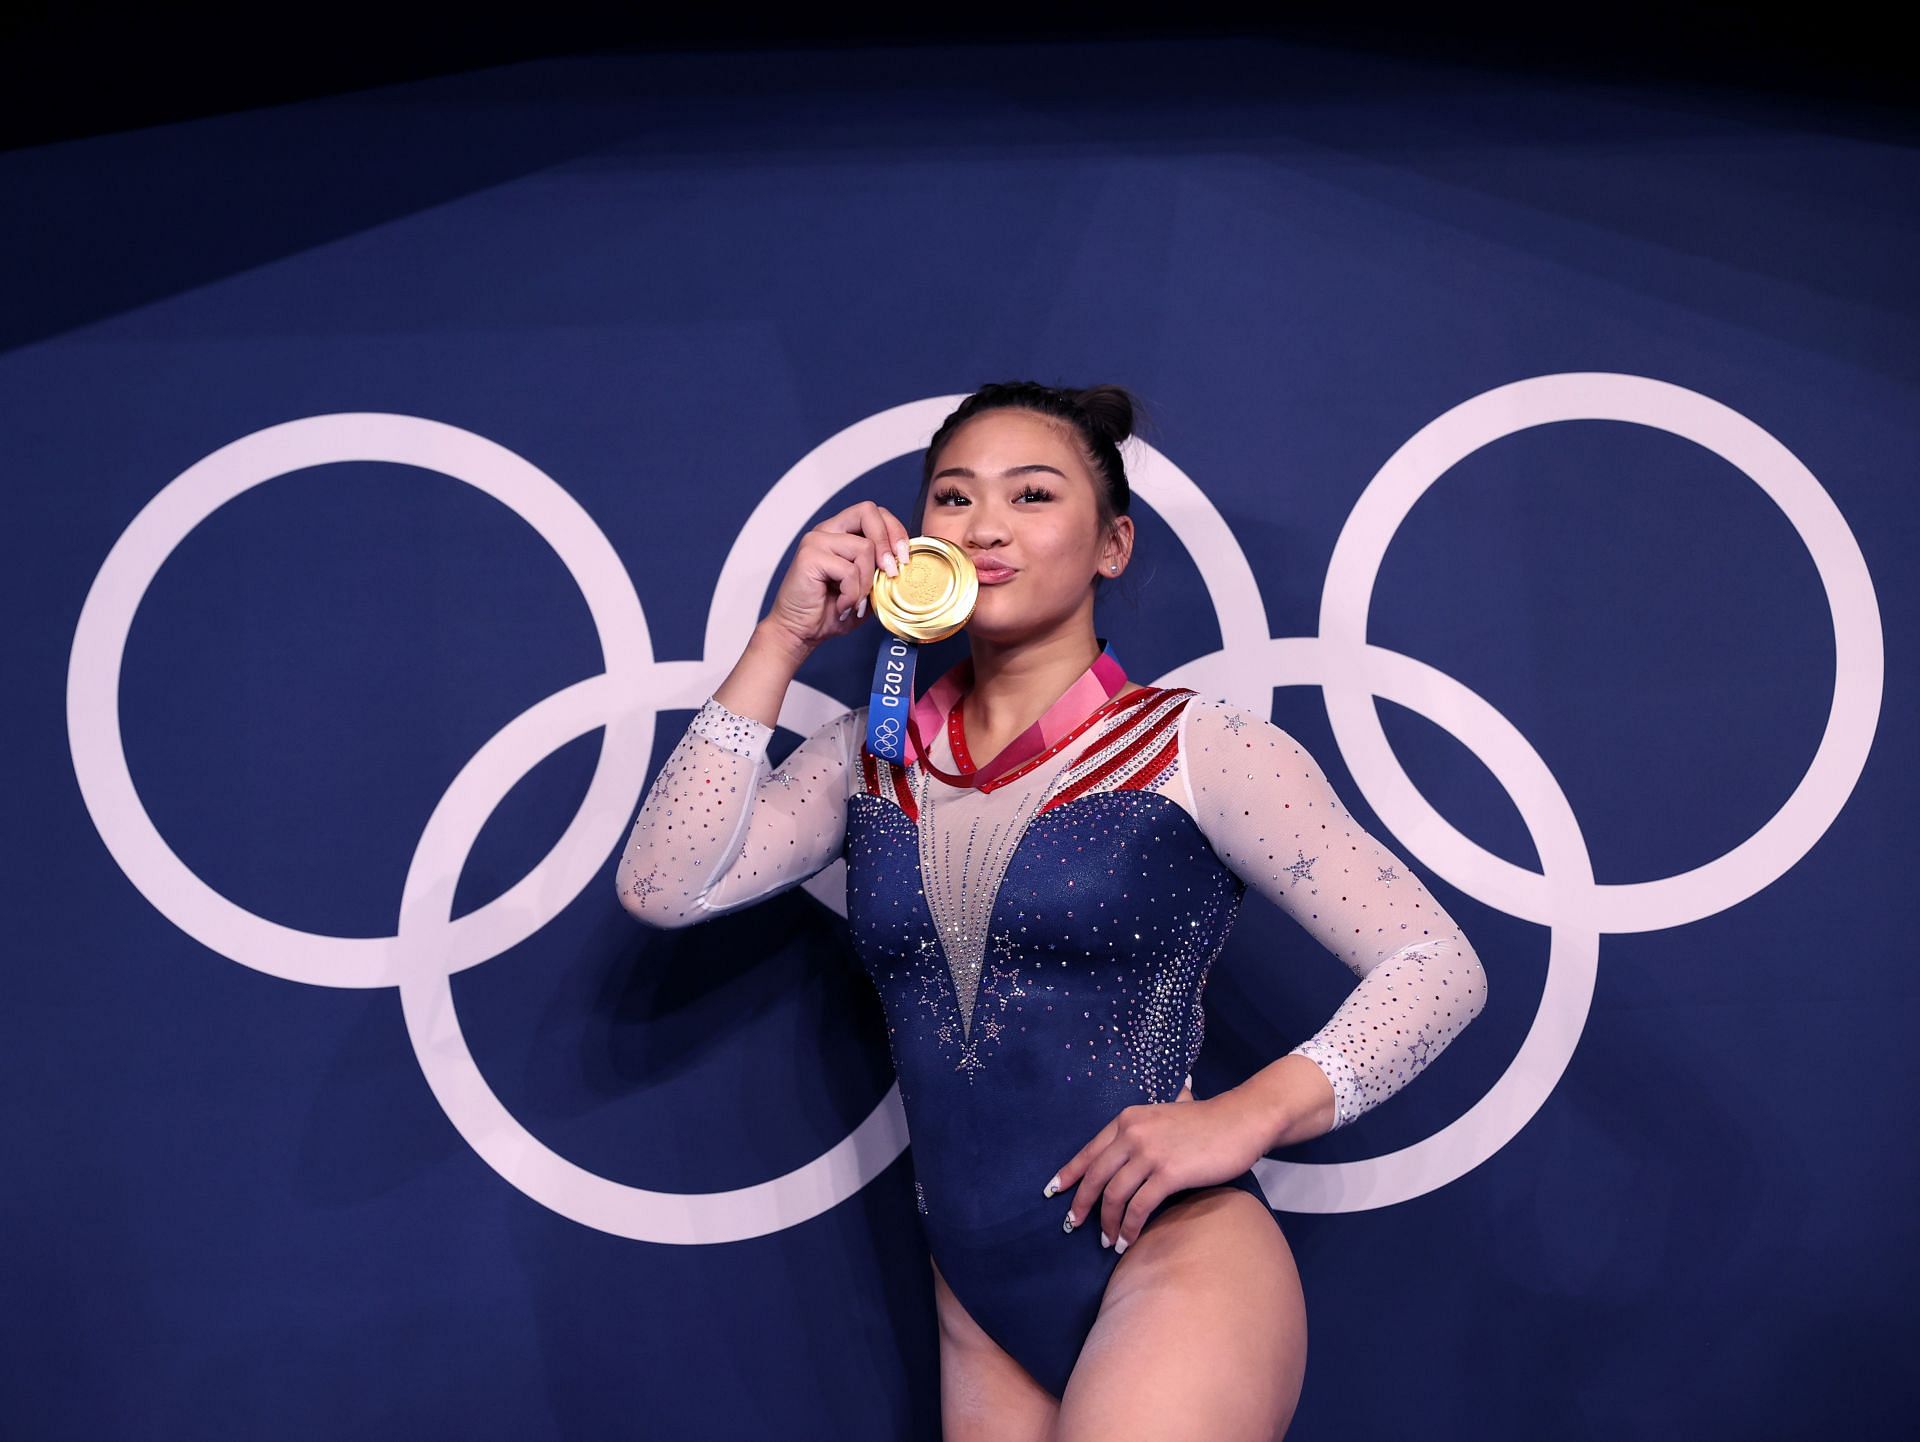 Suni Lee of Team United States poses with her gold medal after winning the Women&#039;s All-Around Final at the 2020 Tokyo Olympic Games at Ariake Gymnastics Centre in Tokyo, Japan.